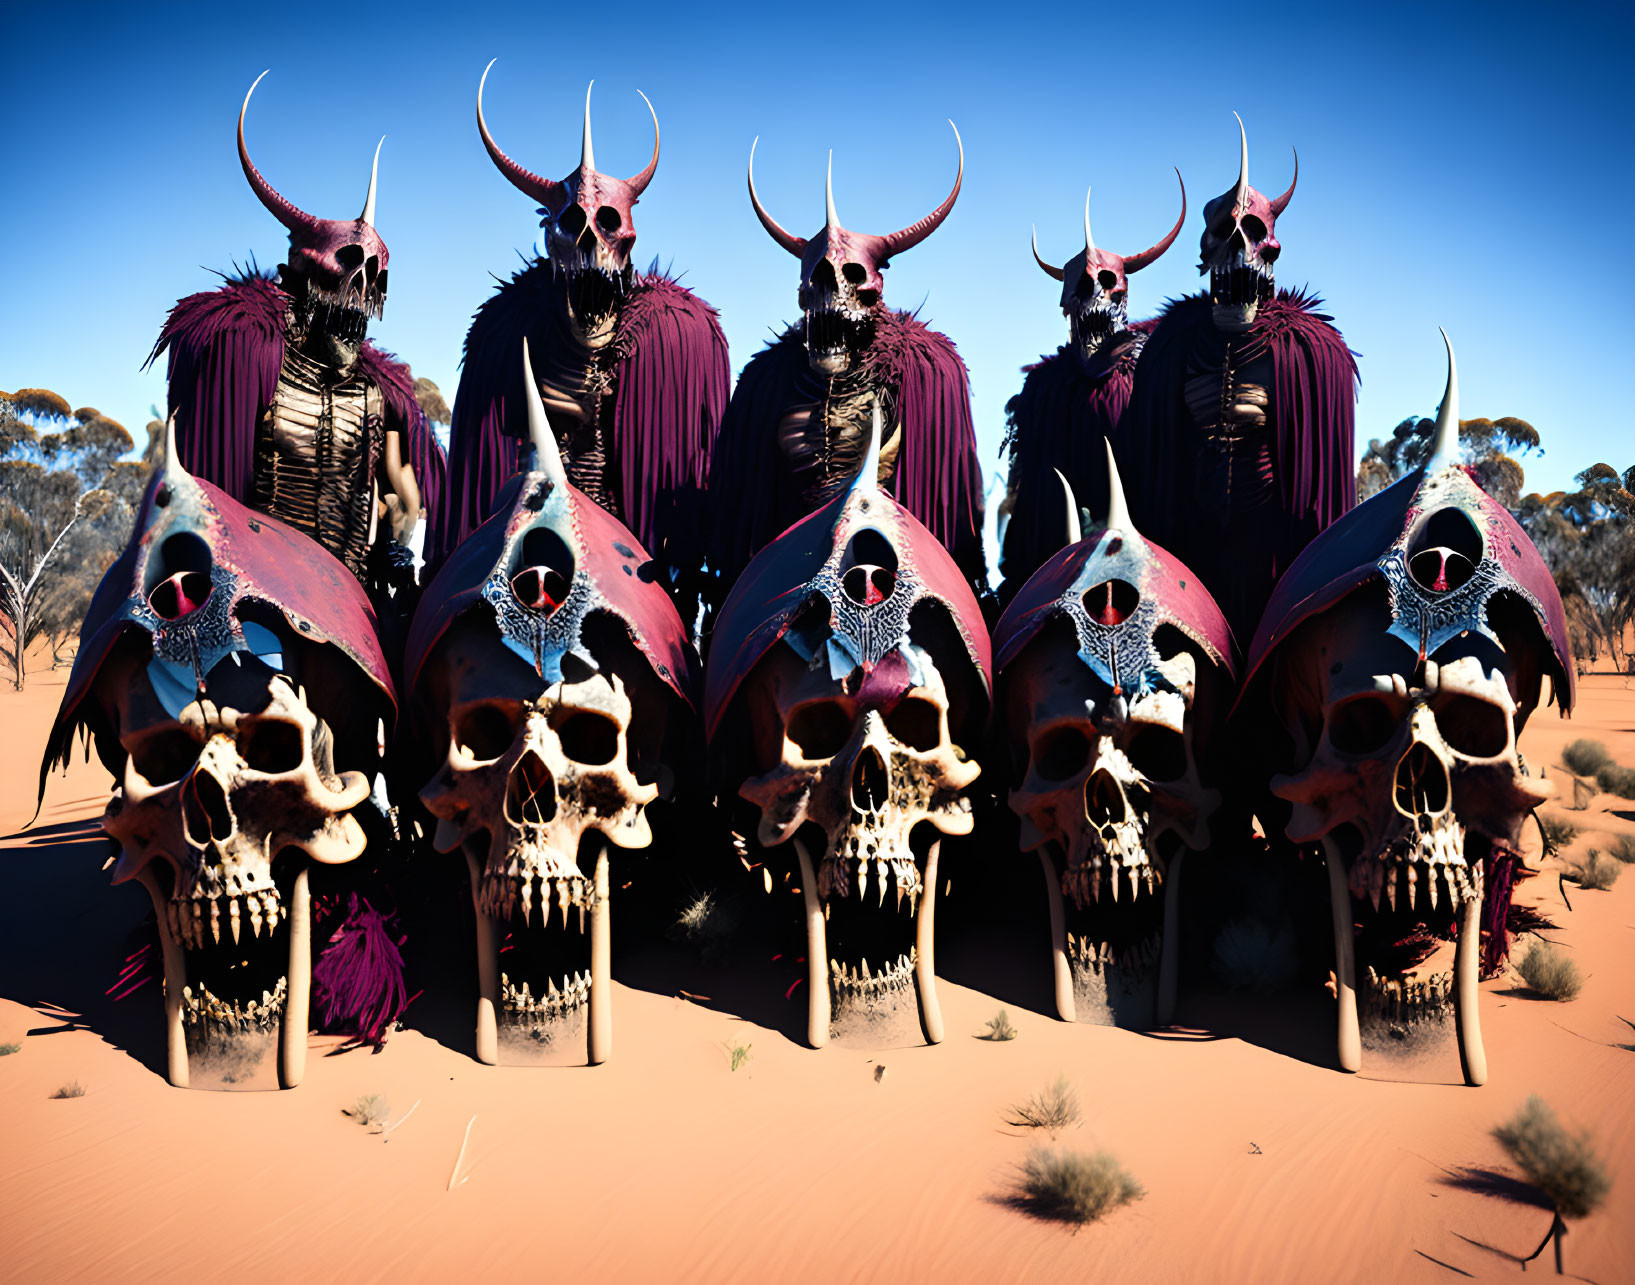 Menacing skull-faced figures with horns and red cloaks in desert landscape